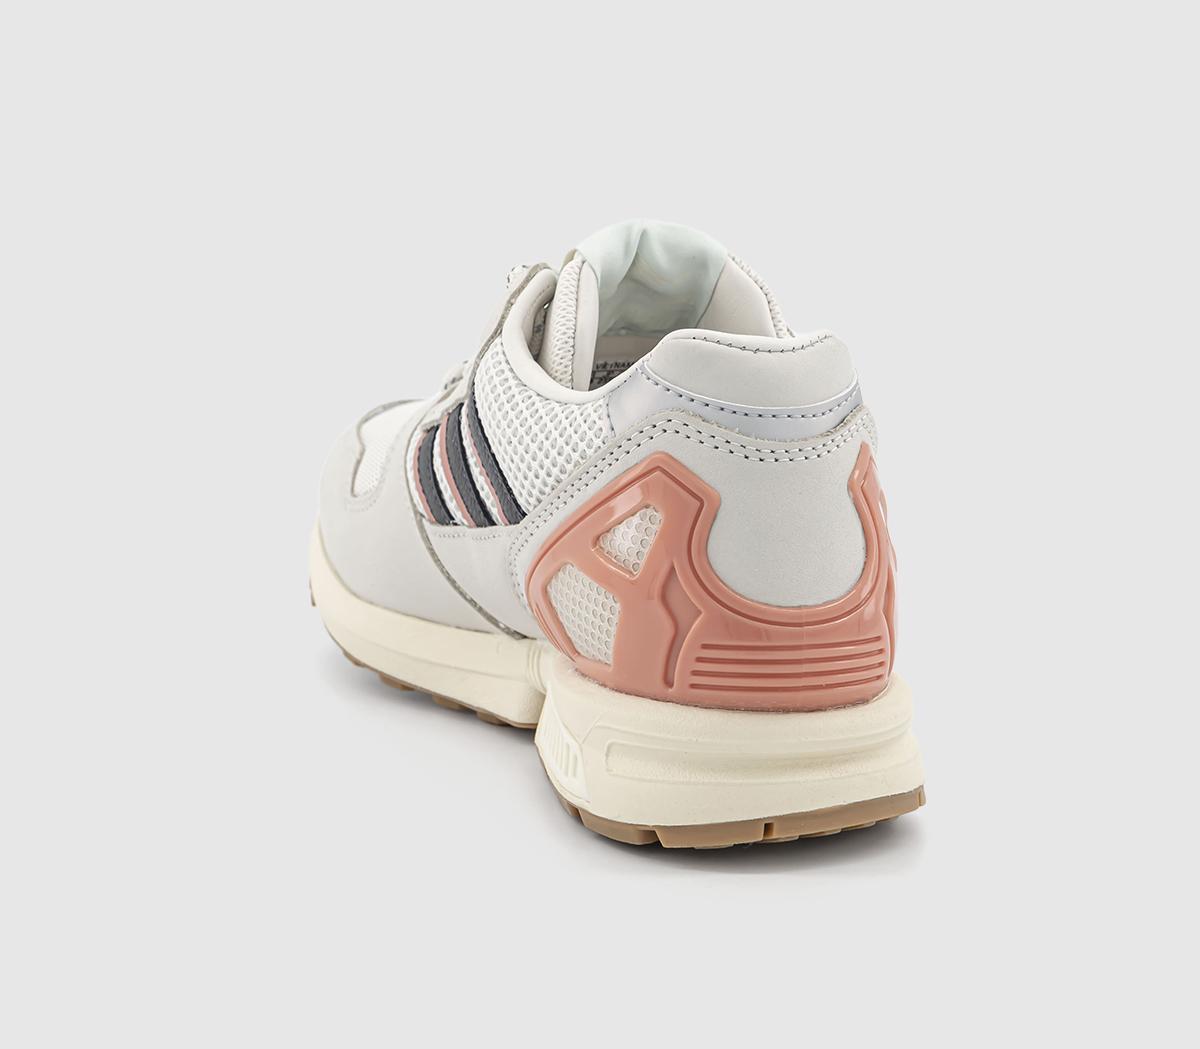 adidas Z-X Trainers White Tint White Offwhite - Women's Trainers